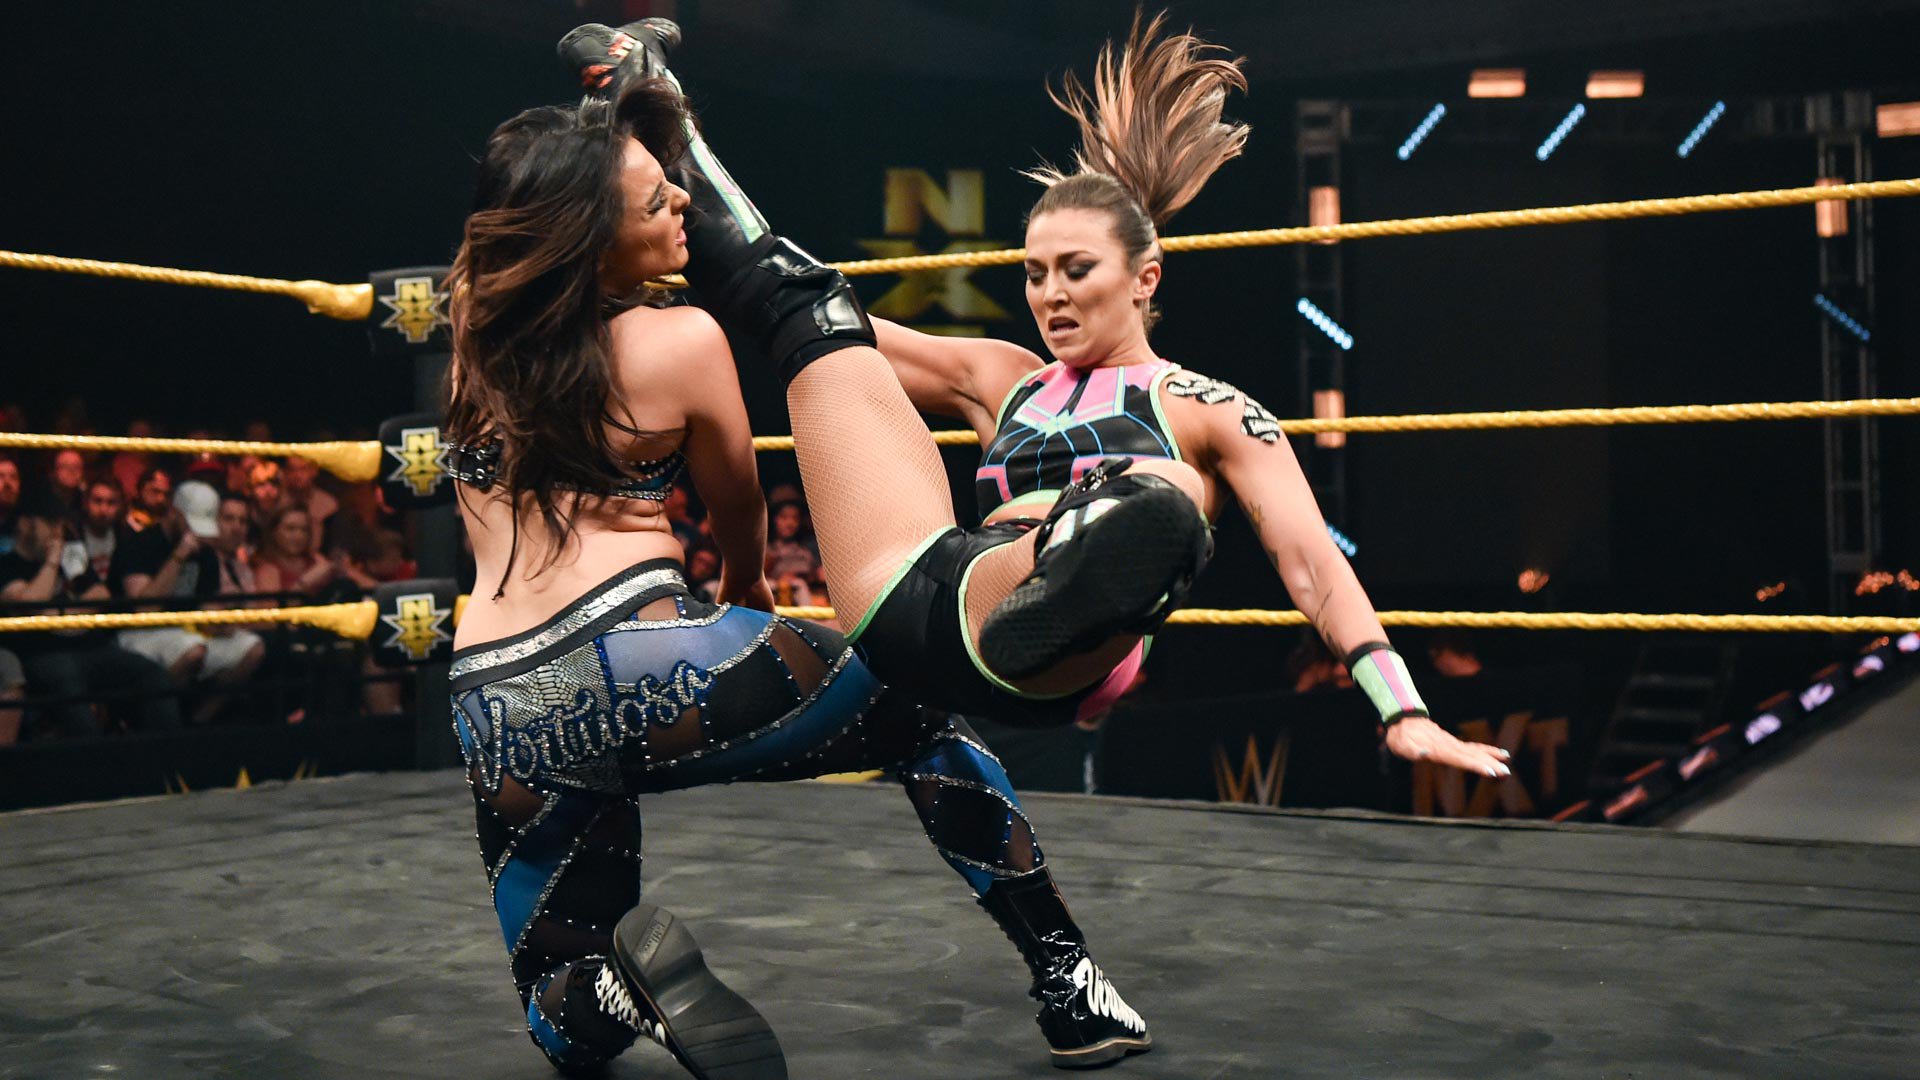 Tegan Nox def. Deonna Purrazzo to qualify for the NXT Women’s